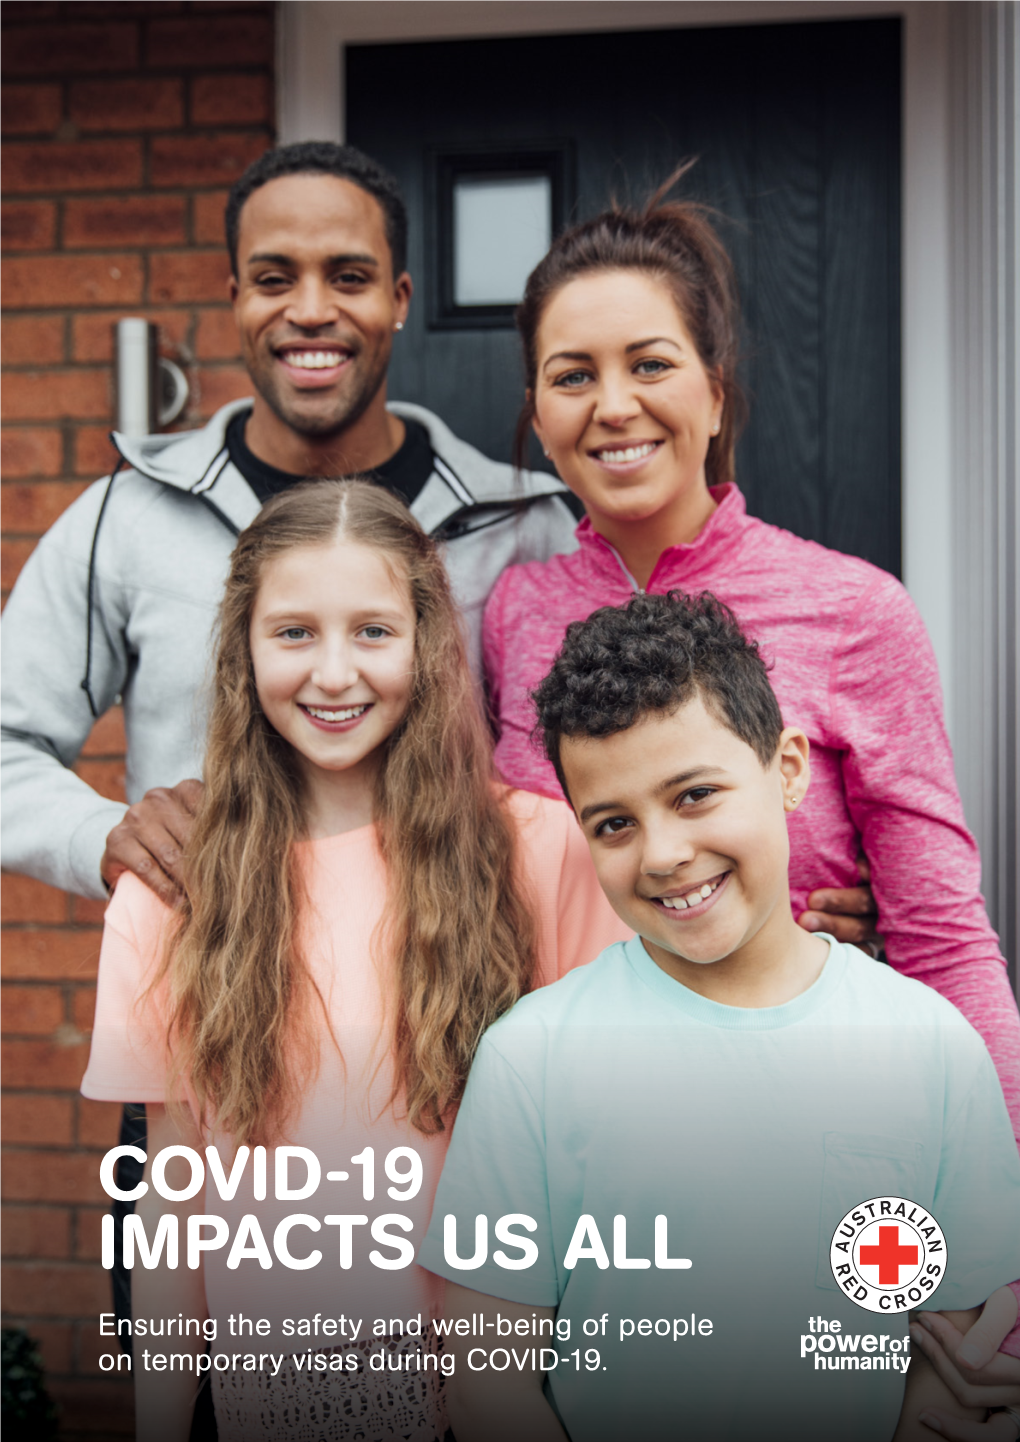 COVID-19 IMPACTS US ALL: Ensuring the Safety and Well-Being of People on Temporary Visas During COVID-19 | 5 EXECUTIVE SUMMARY